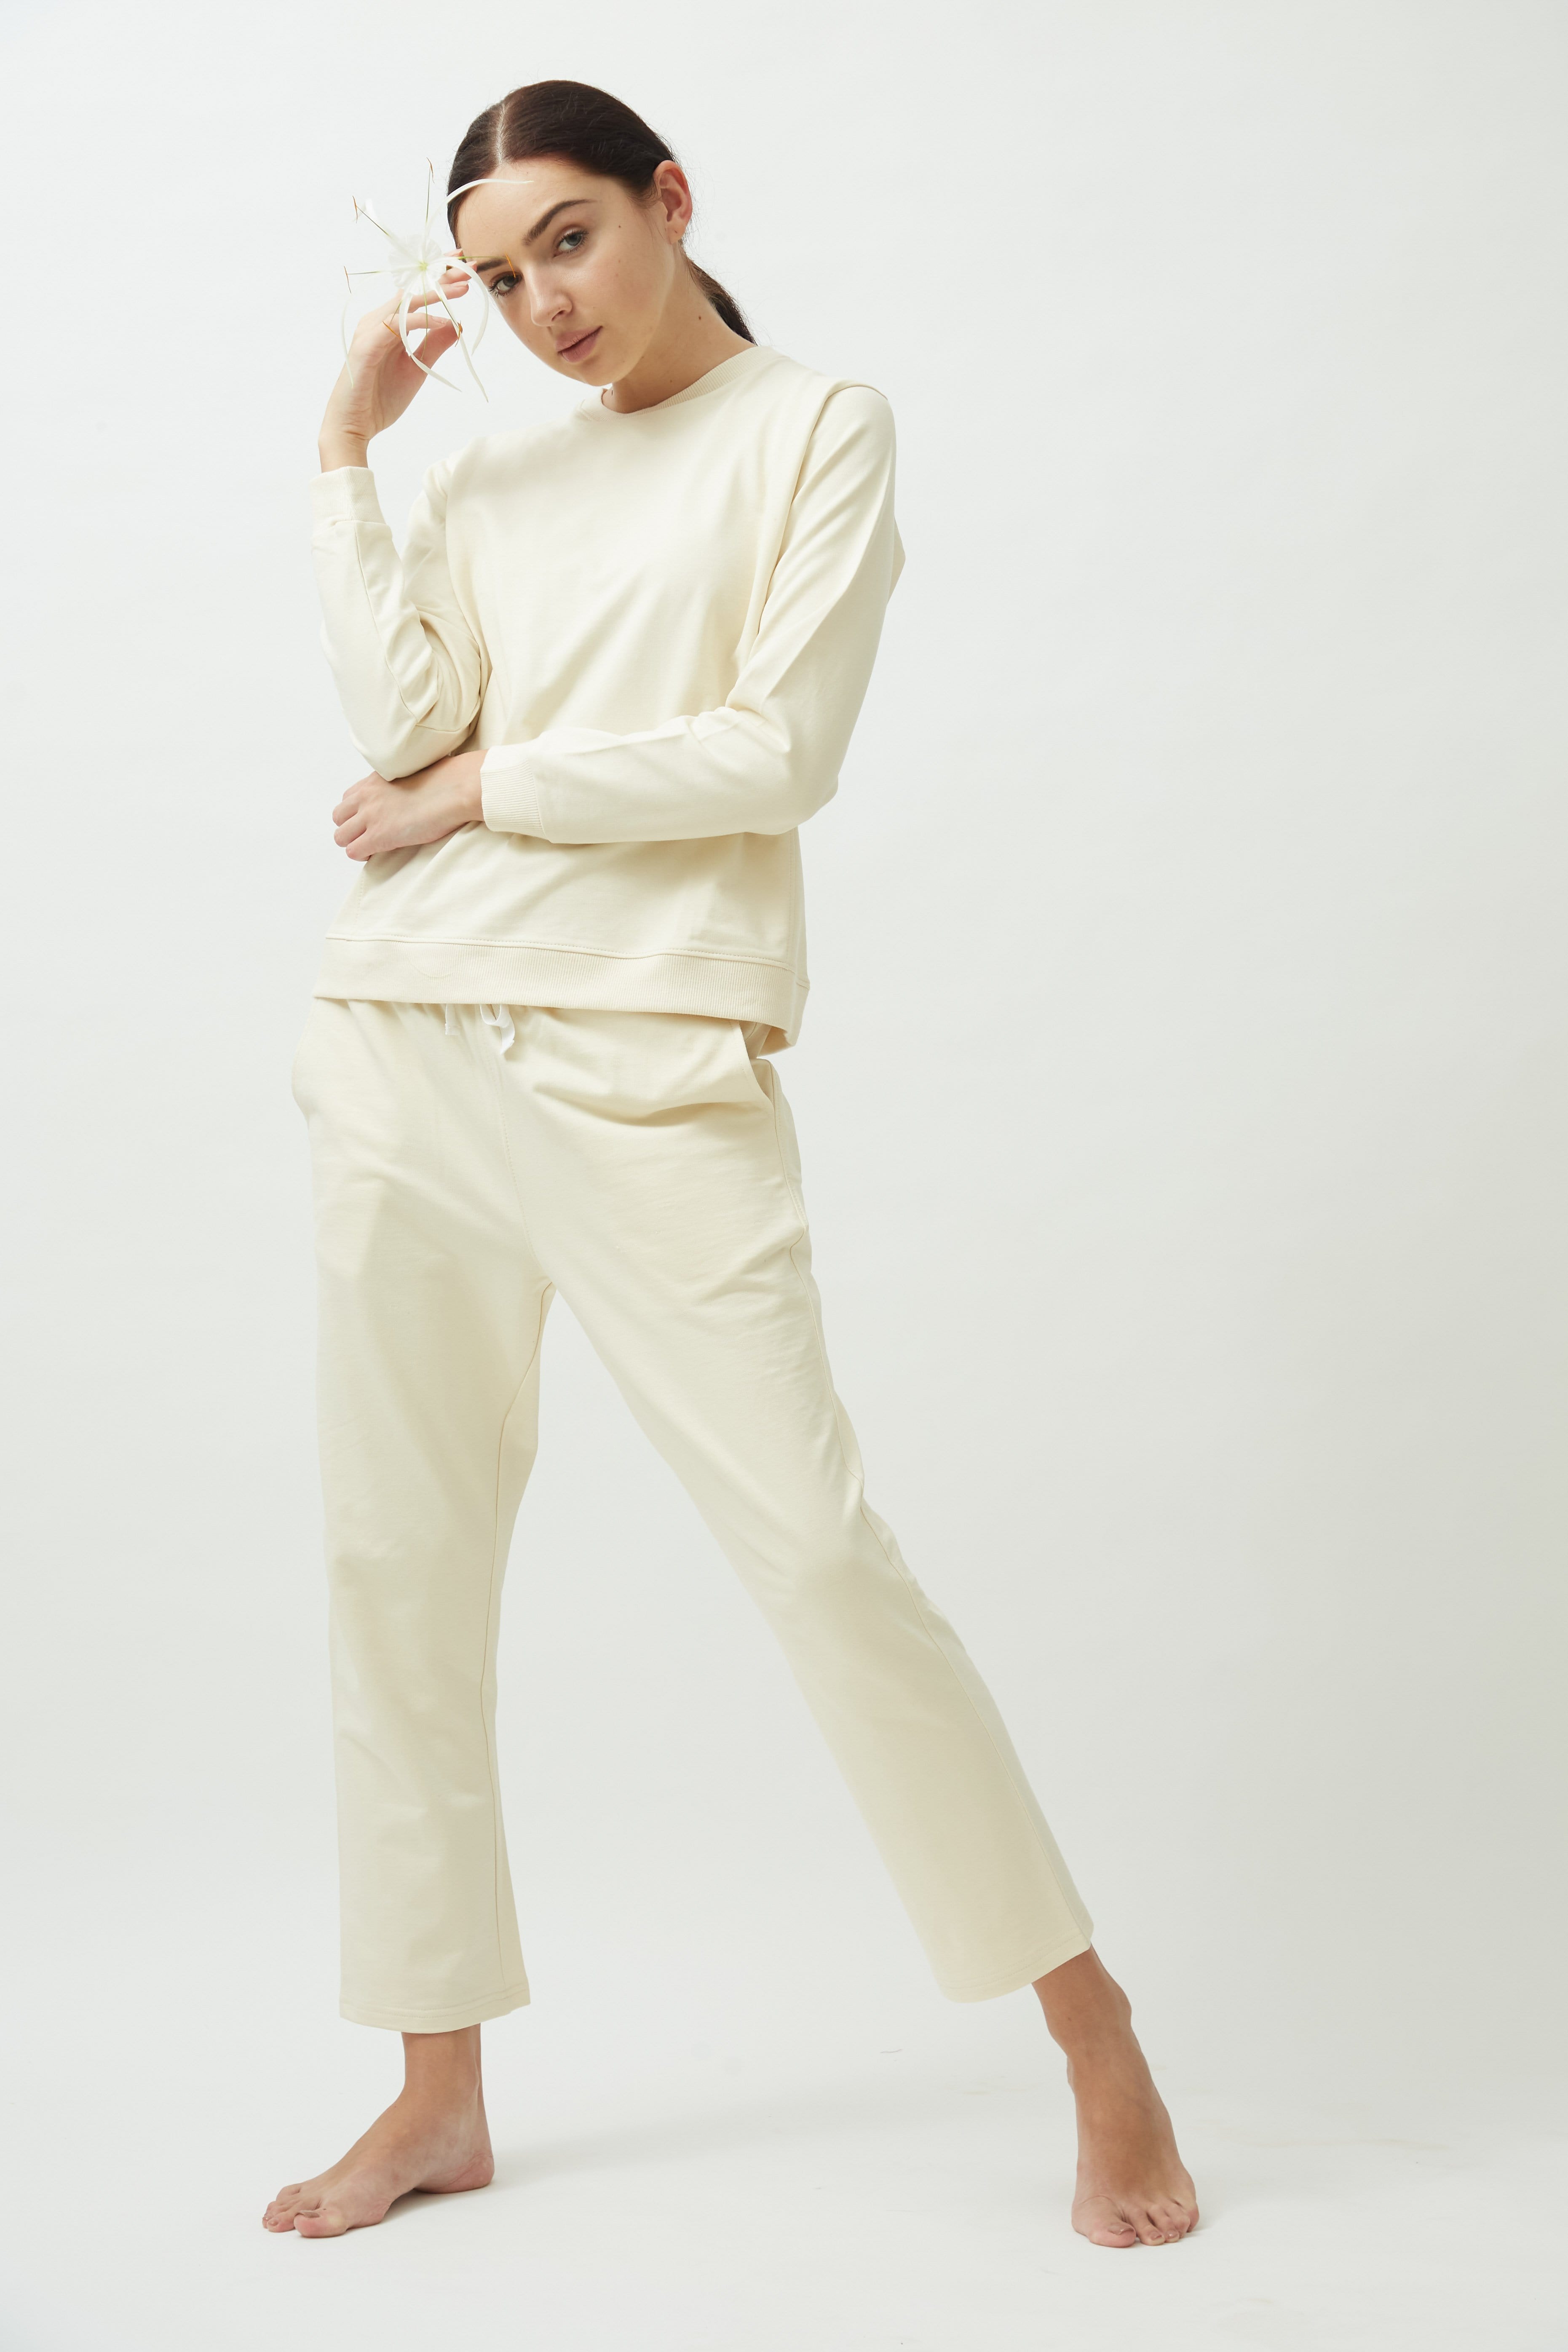 Saltpetre womens wear, lounge wear for casual wear.
 Comfortable jogger & sweatshirt co ord set in ecru - cream colour. Made from 100% organic cotton.